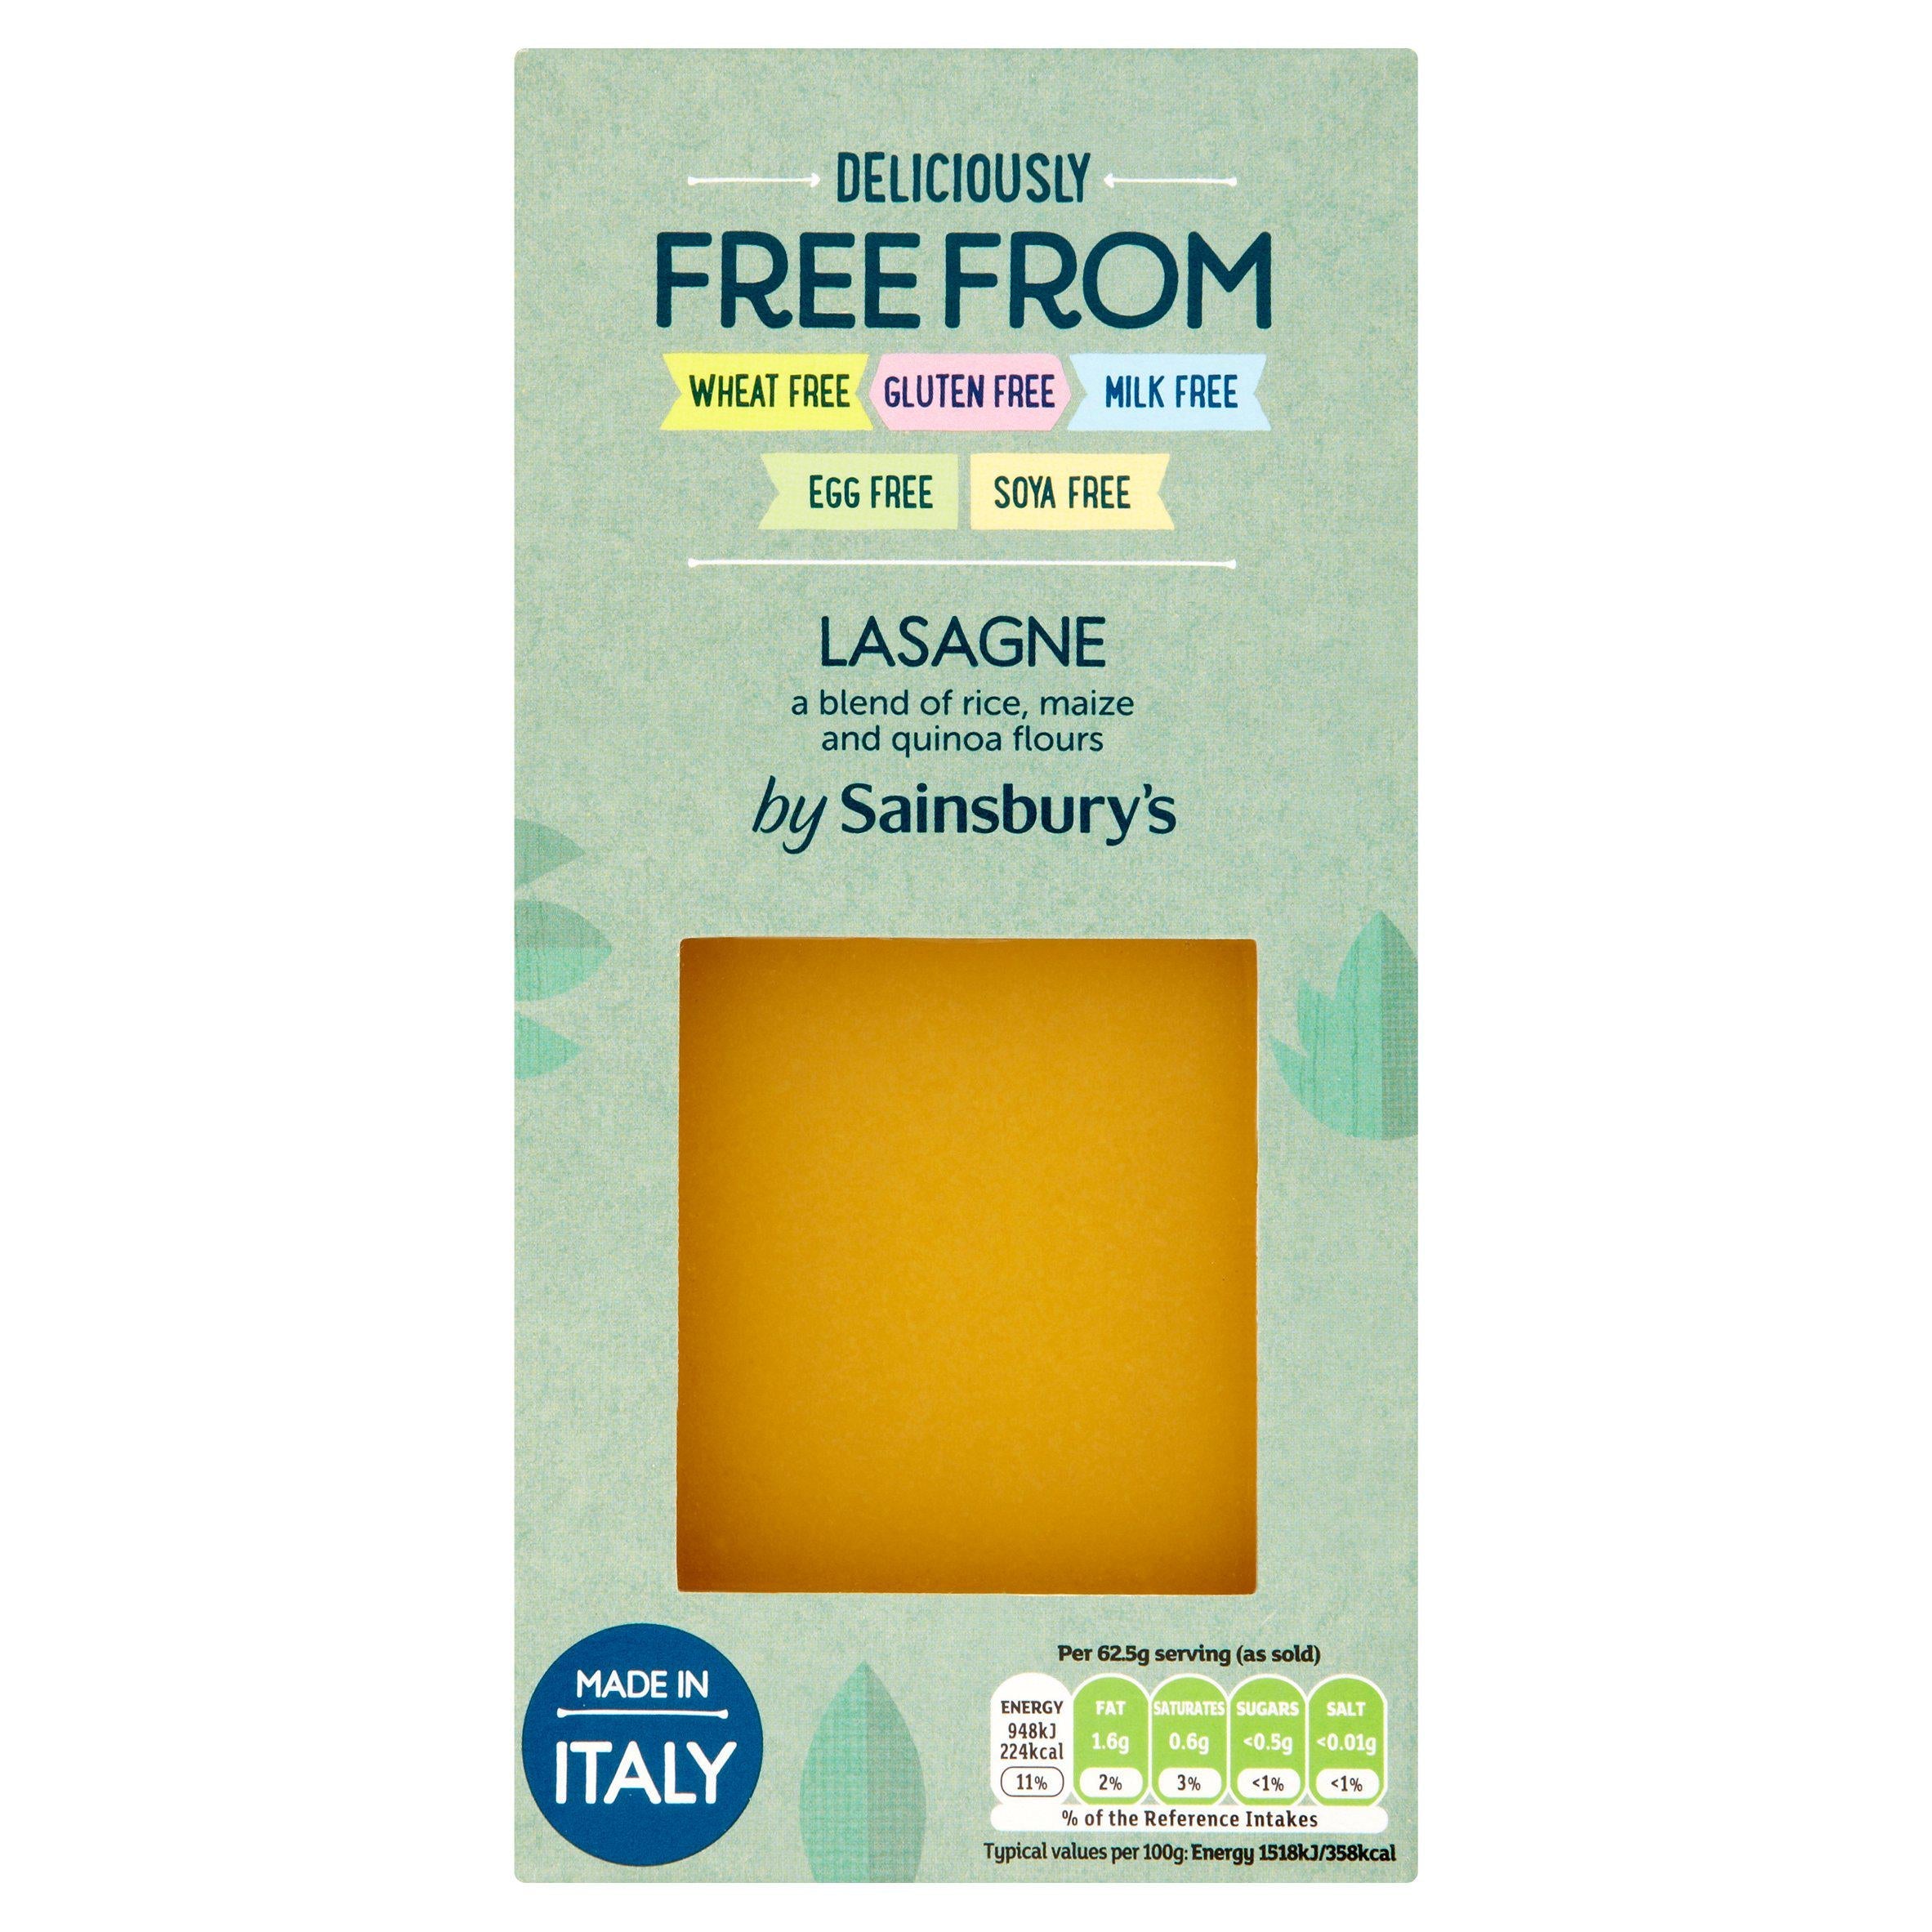 WSO - Sainsbury's Deliciously Free From Lasagne Sheets 250g 1x12